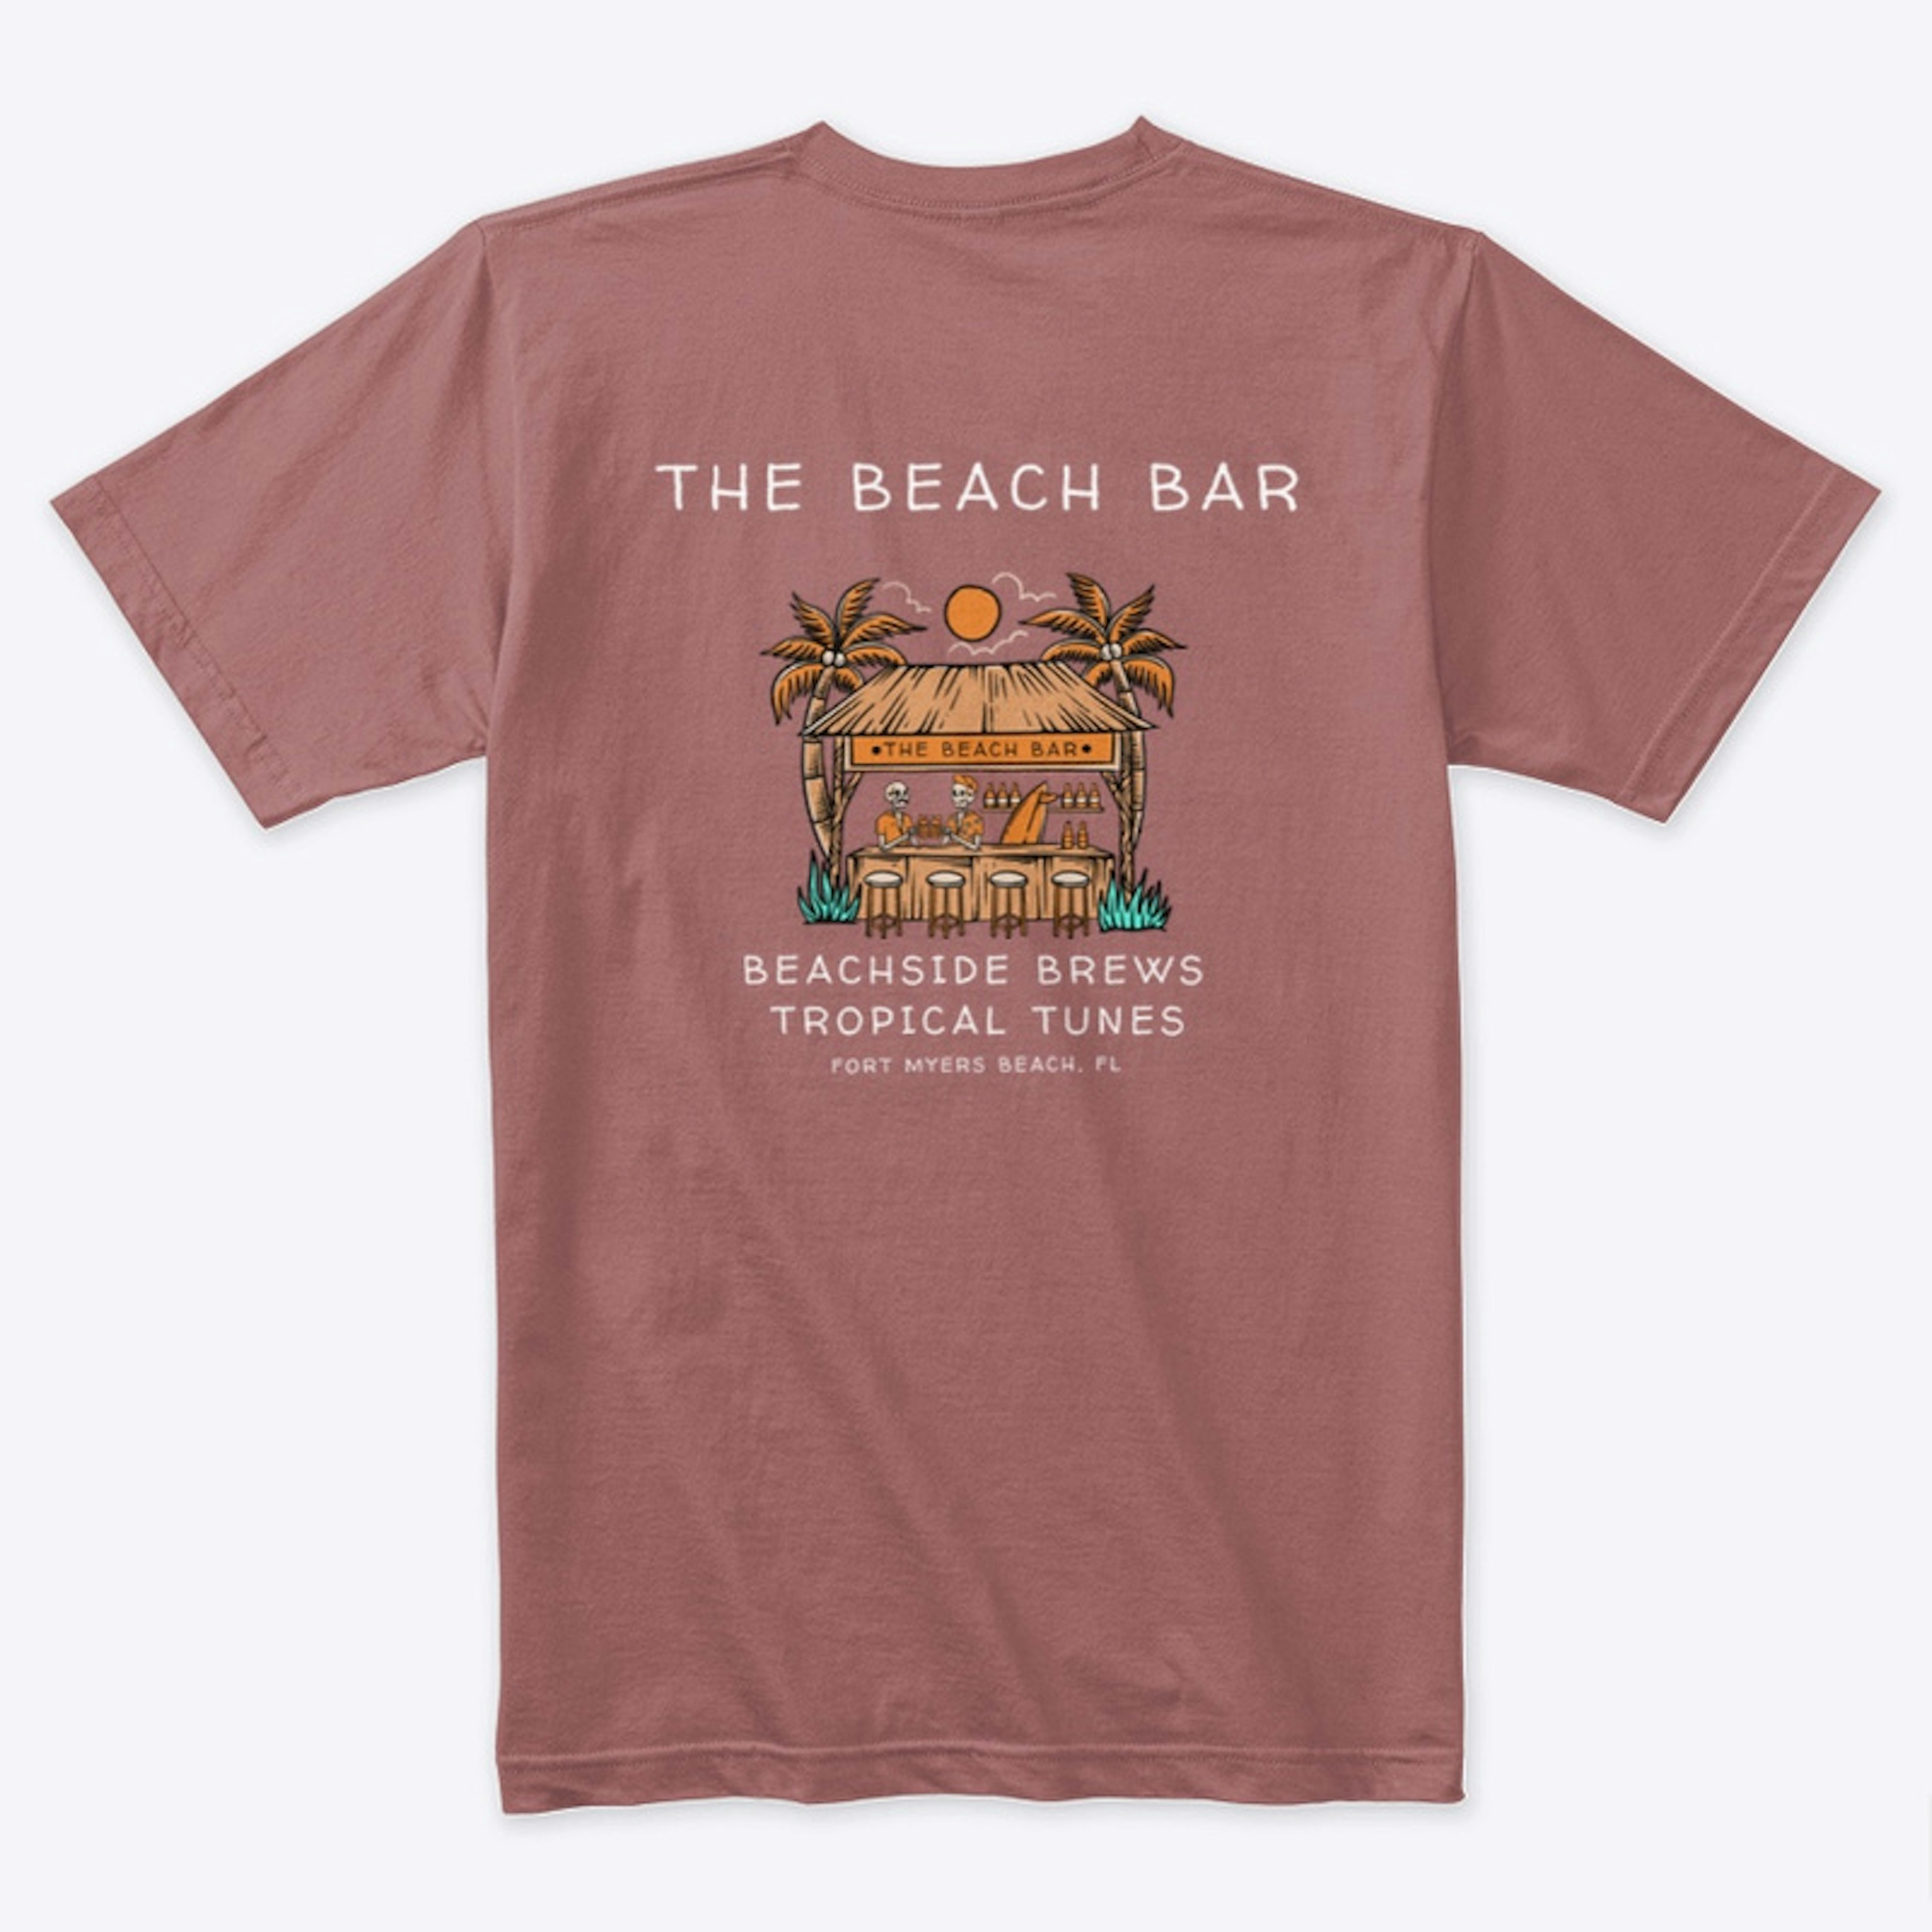 Beachside Brews and Tropical Tunes